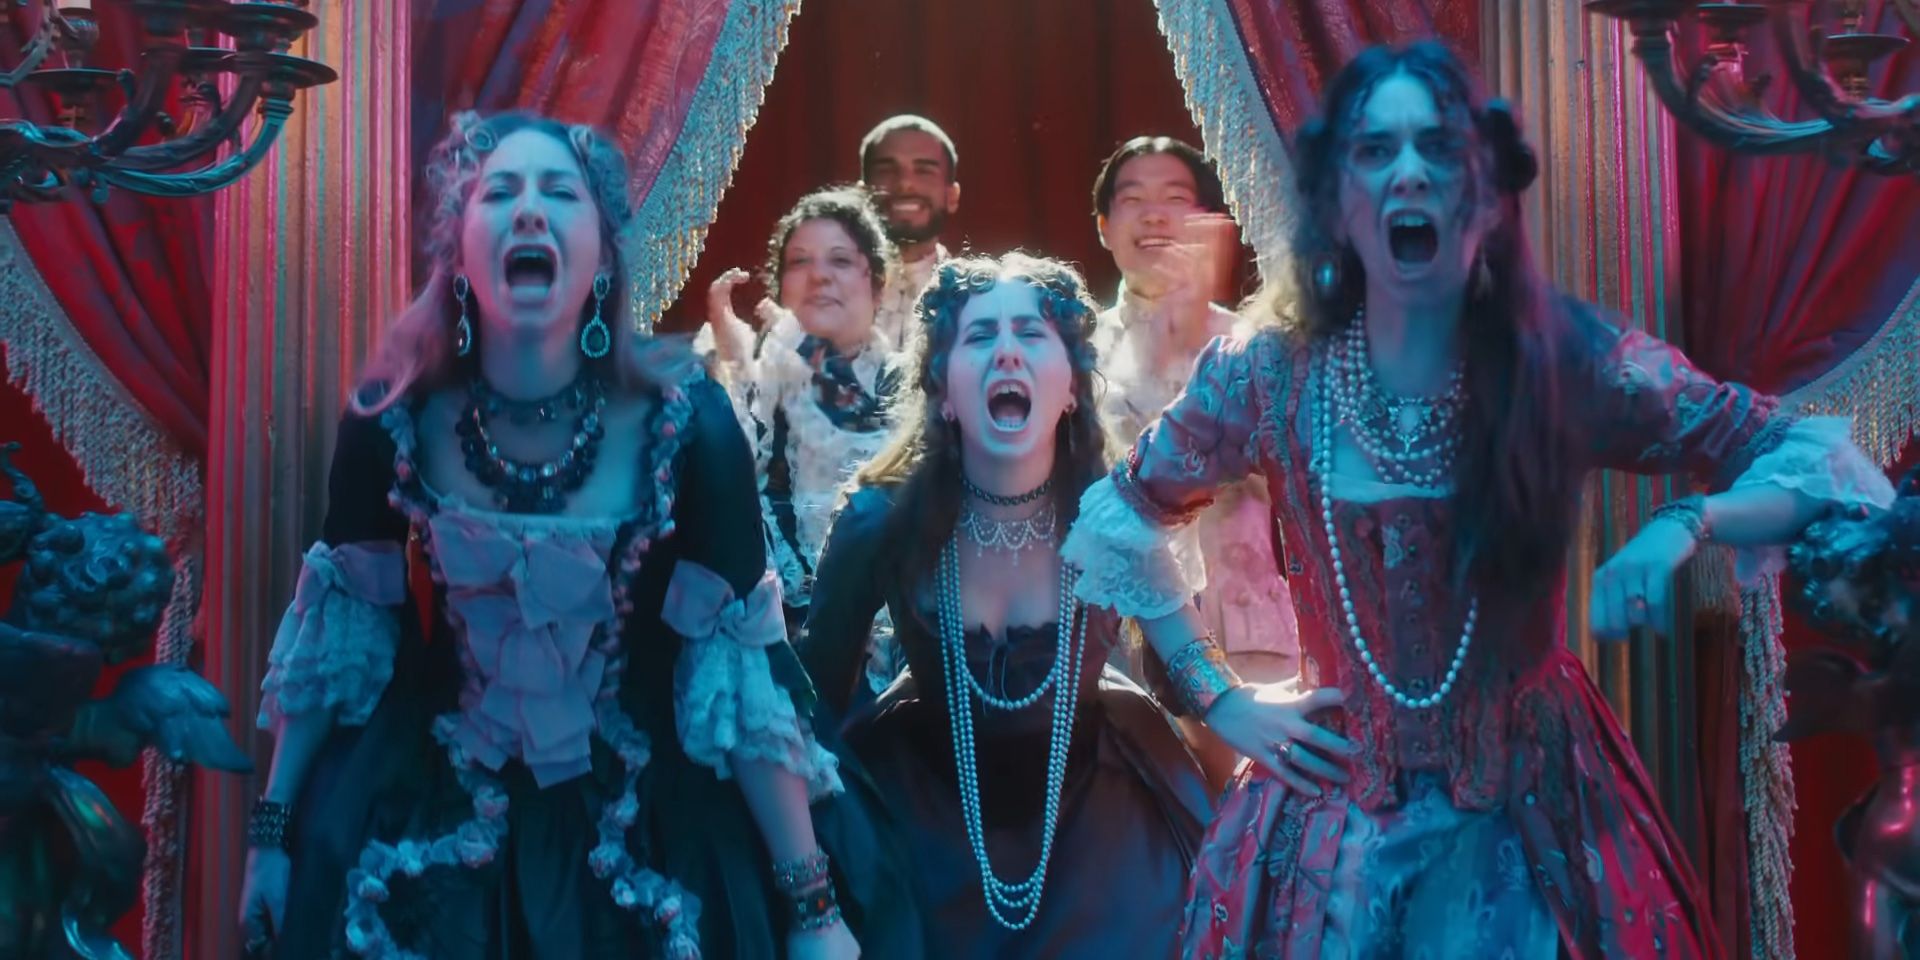 Danielle, Alana, and Este Haim dressed in old-fashioned gowns while screaming in Taylor Swift's 